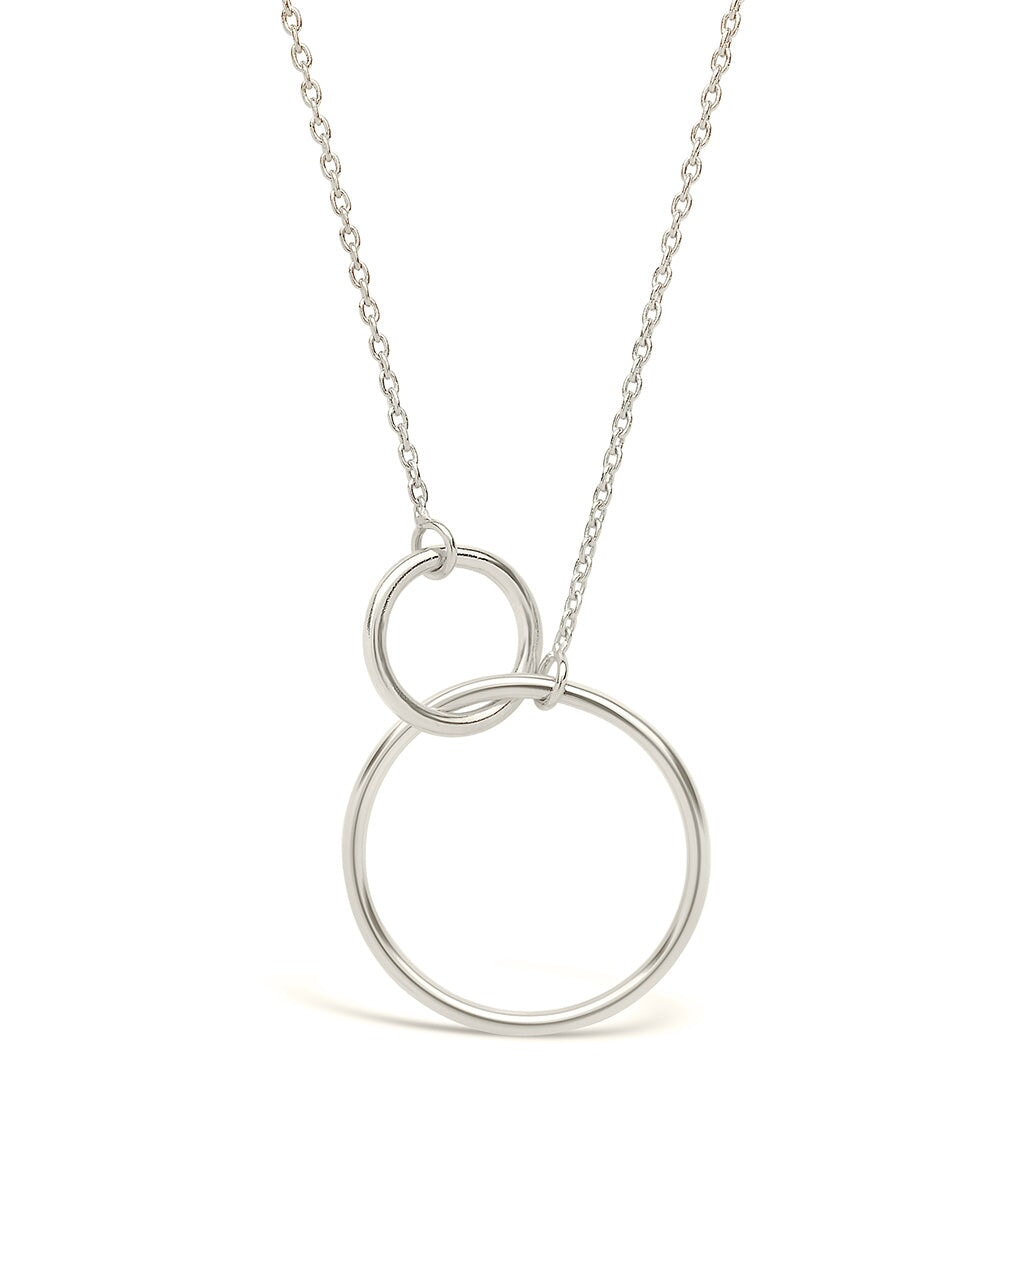 Interlocking sterling silver necklace – JQIN BRANCHES